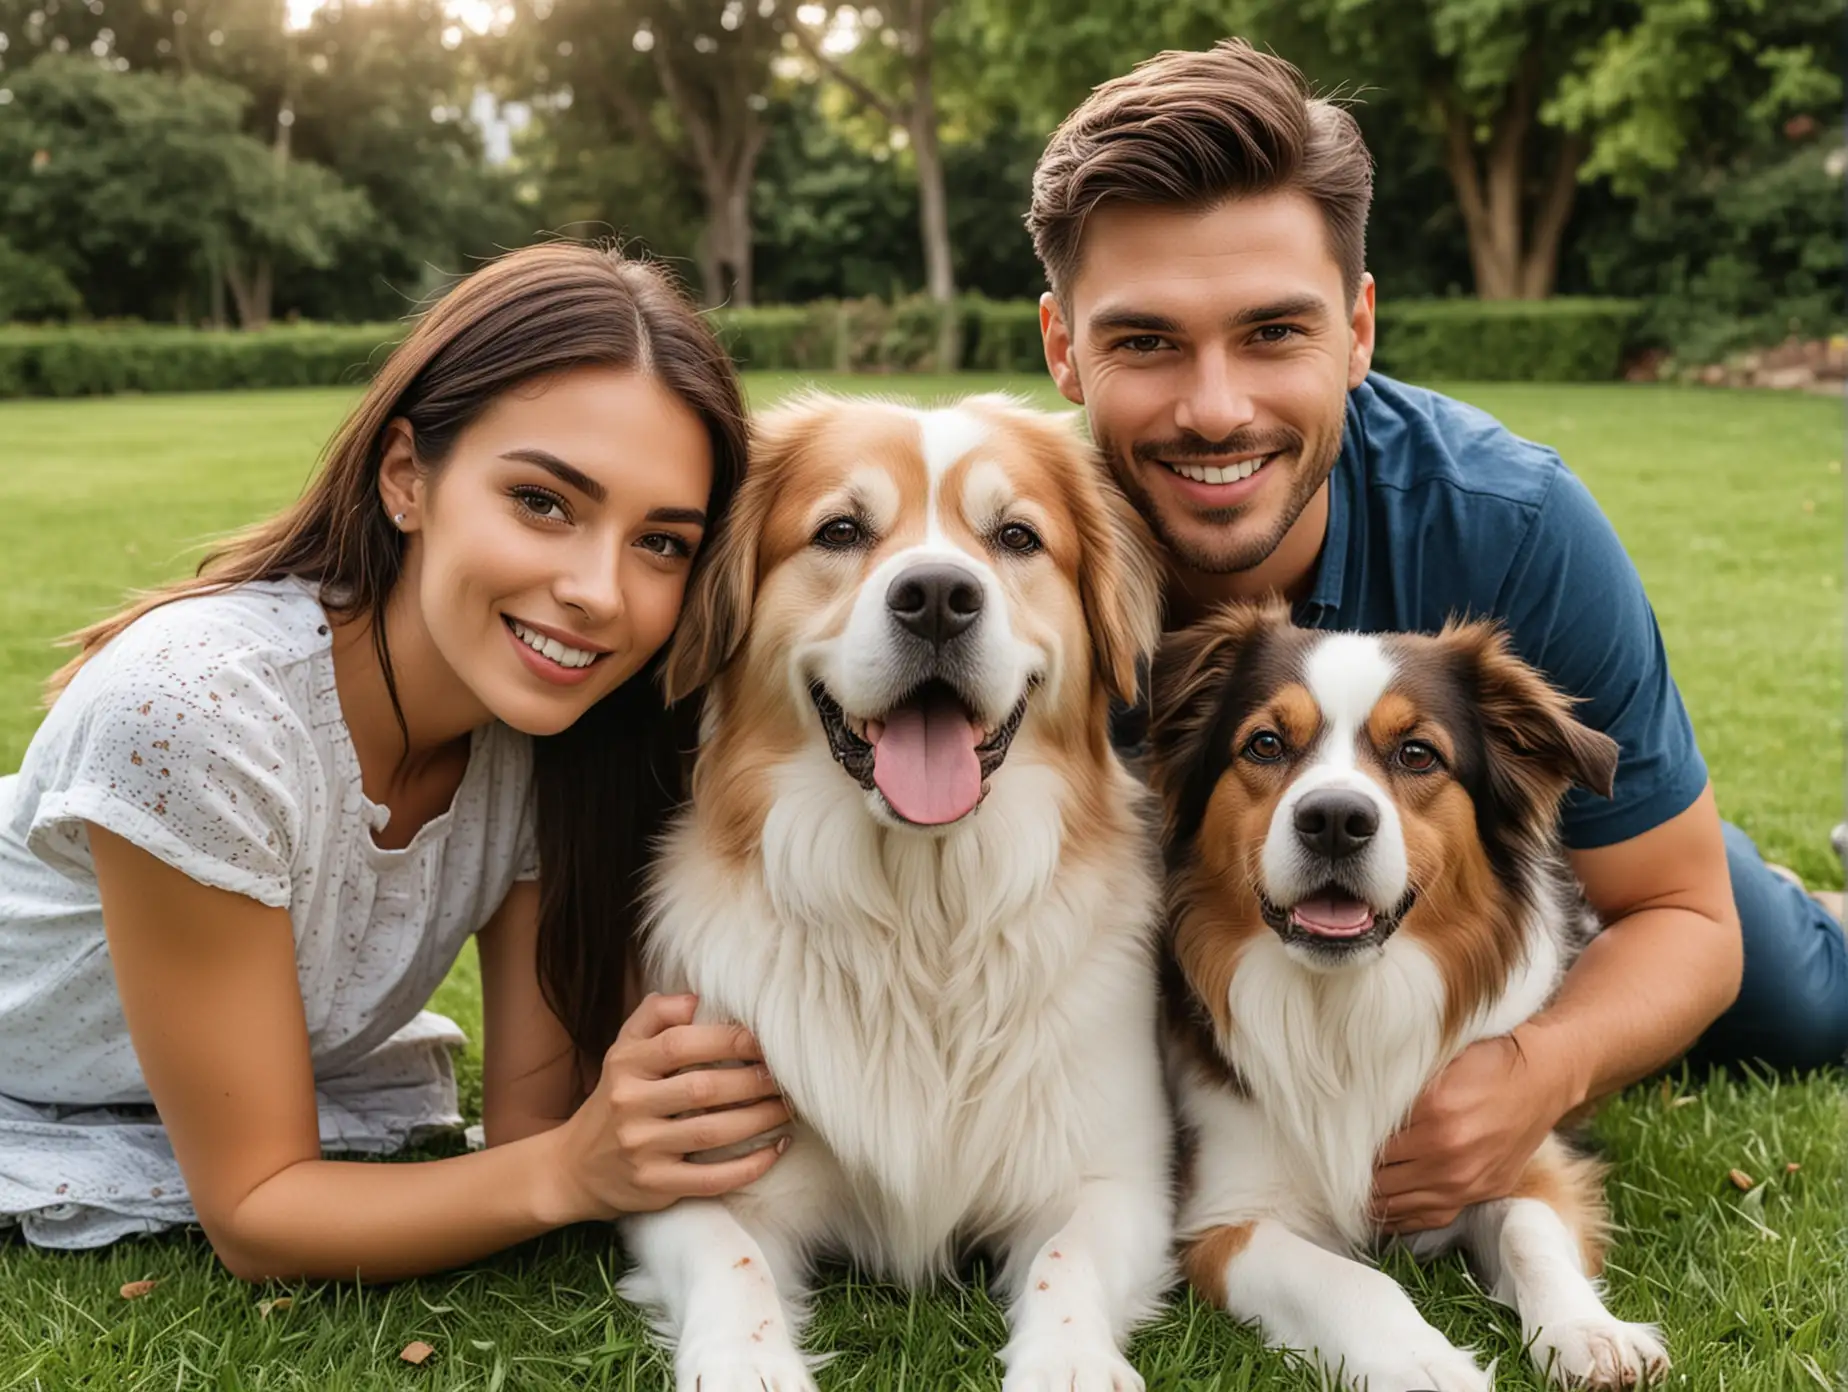 Attractive Couple and Dog Pose for Professional Lawn Portrait